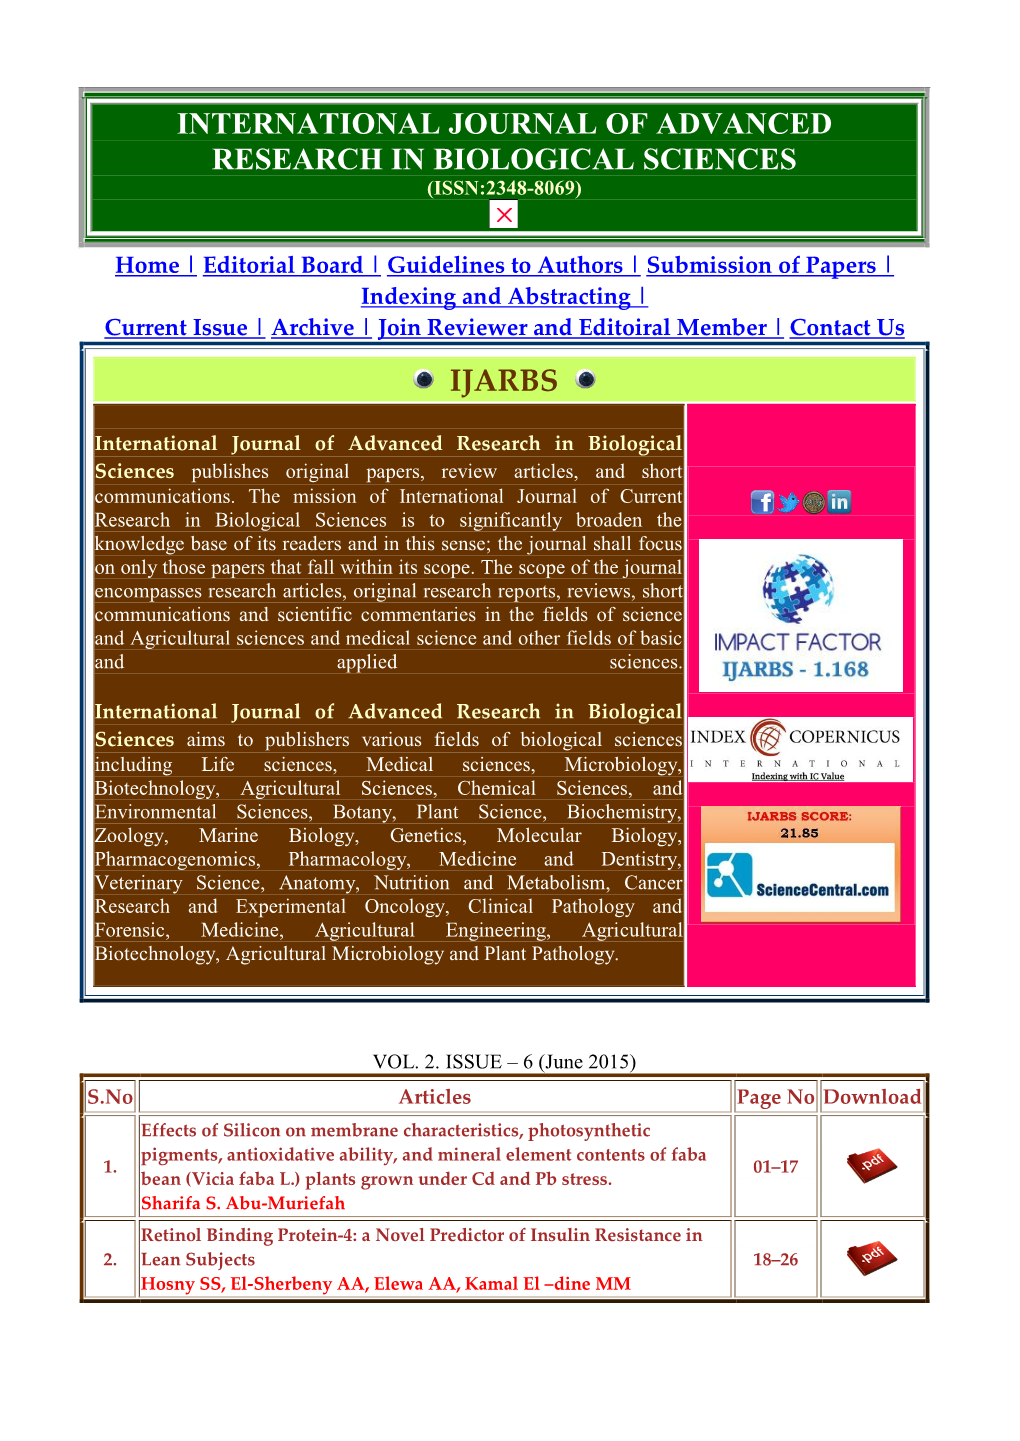 International Journal of Advanced Research in Biological Sciences (Issn:2348-8069)